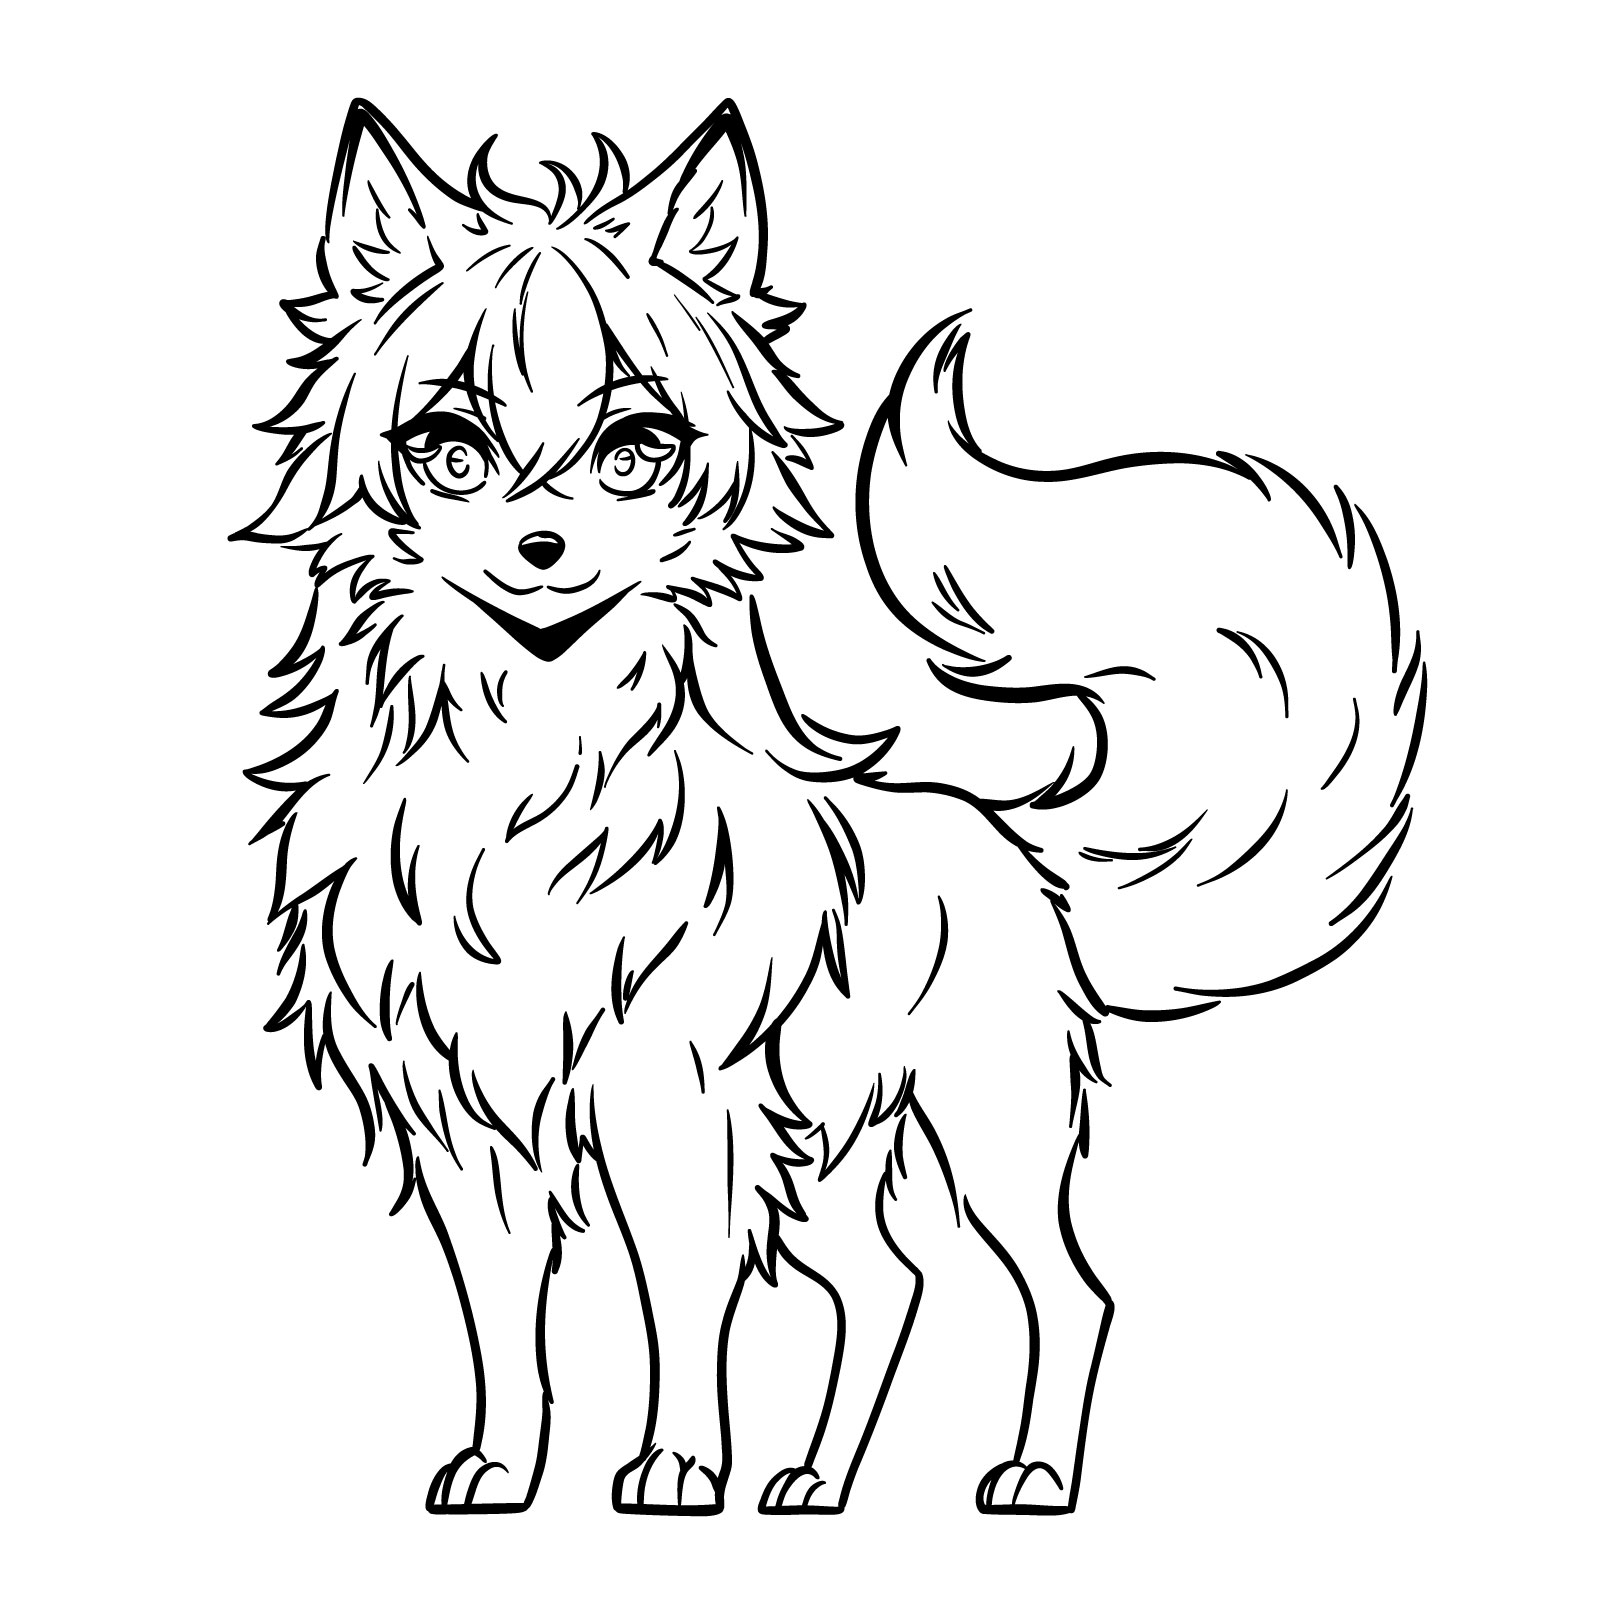 Anime-style illustration of a muddy white wolf on Craiyon